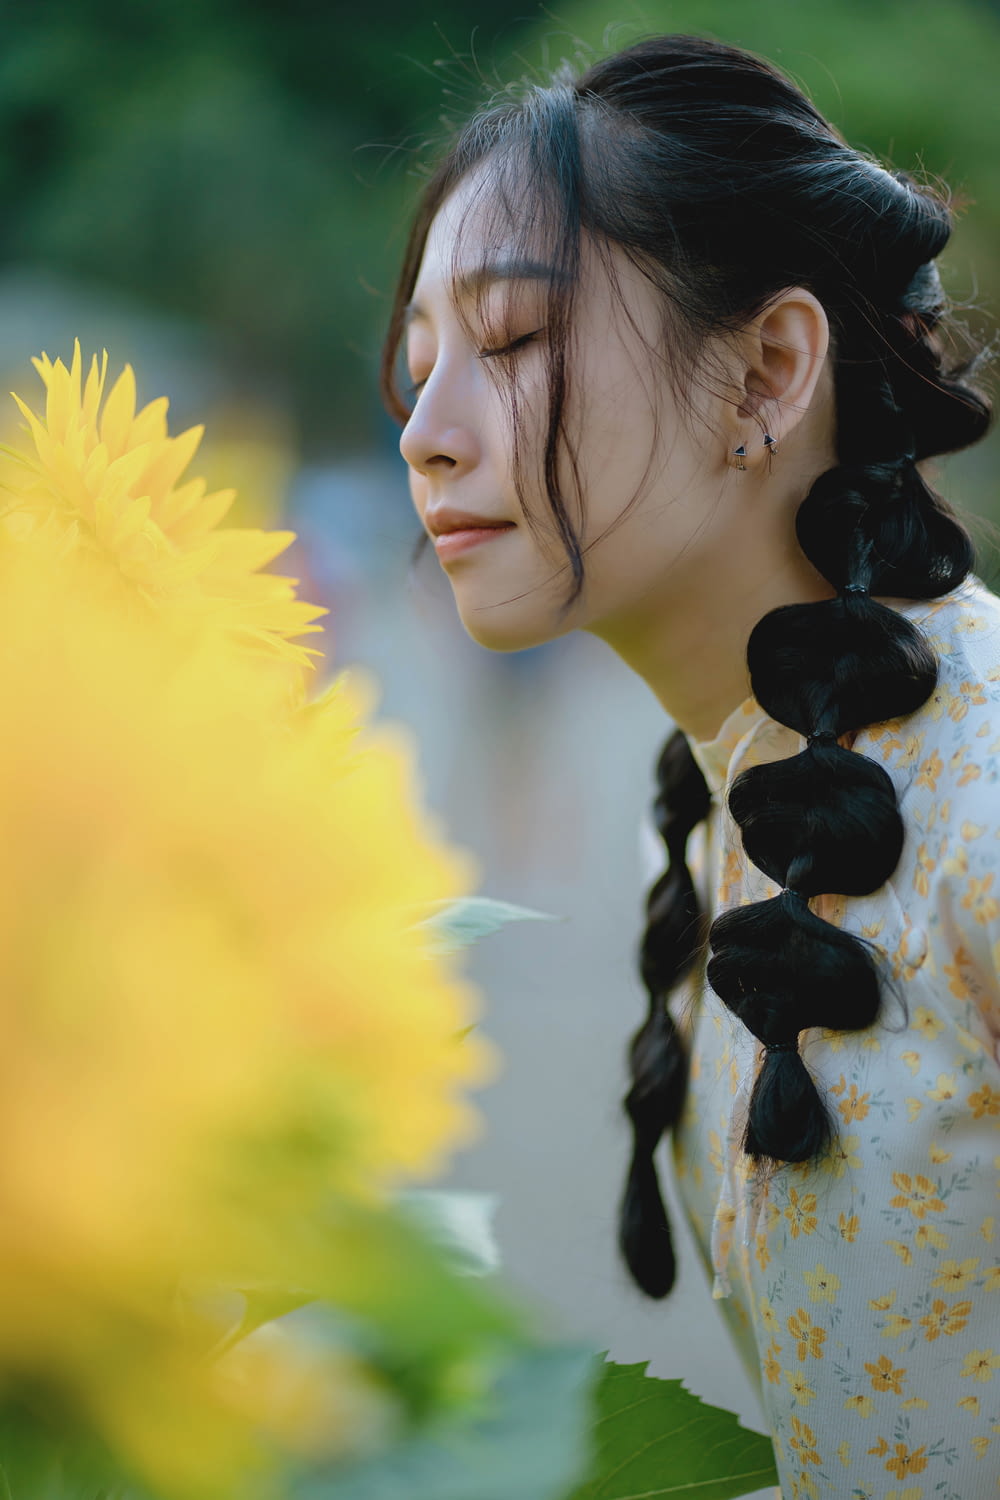 a woman with long black hair standing next to a yellow flower